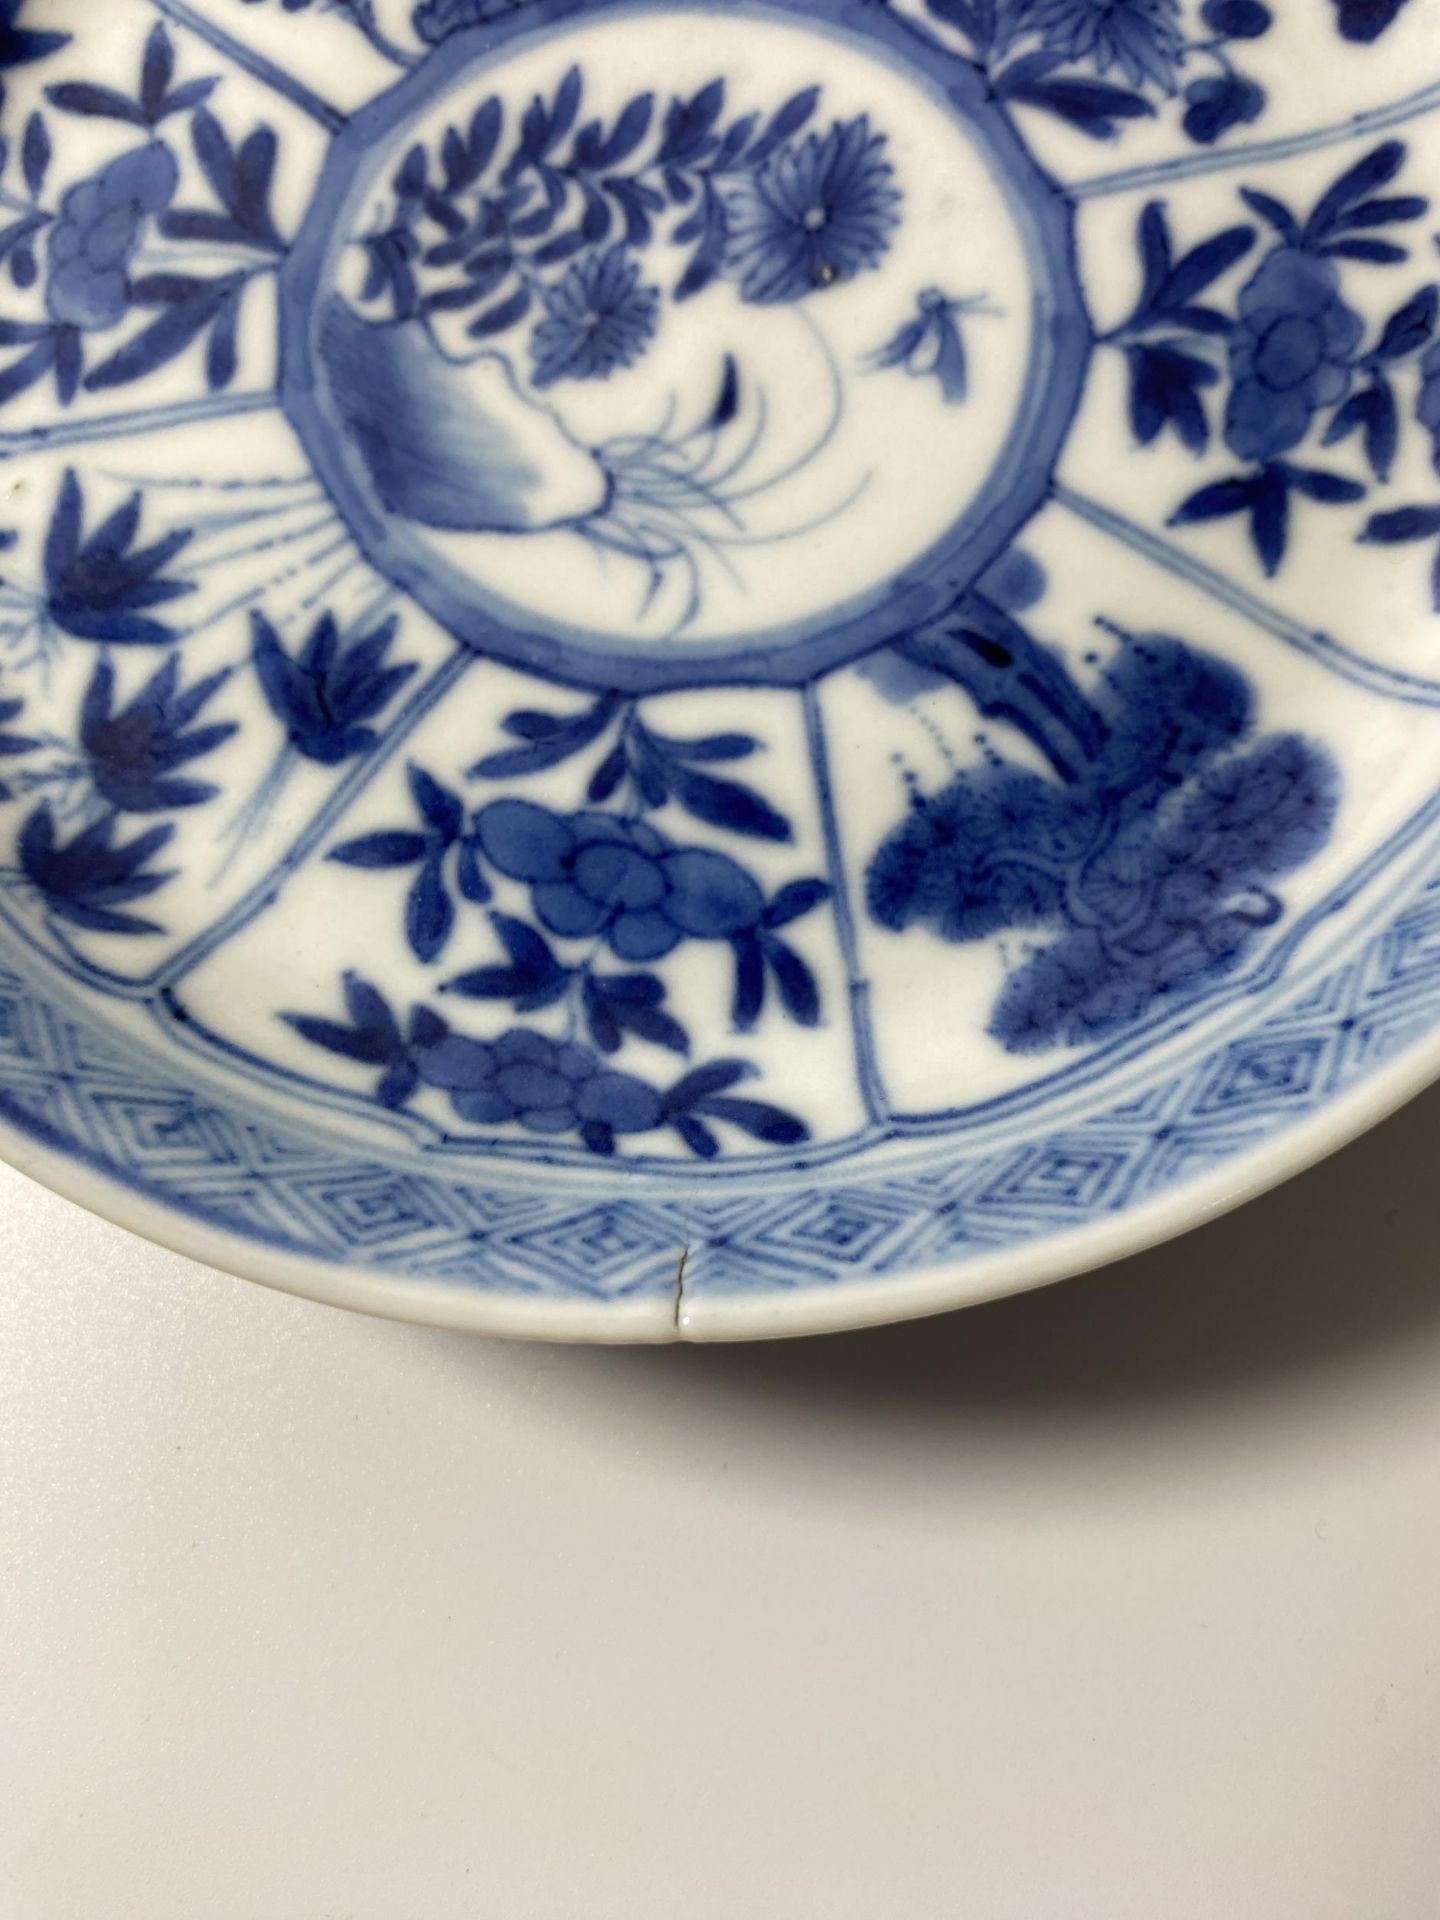 A PAIR OF KANGXI PERIOD (1661-1722) CHINESE BLUE AND WHITE PORCELAIN PLATES, ARTEMESIA LEAF MARK - Image 12 of 13